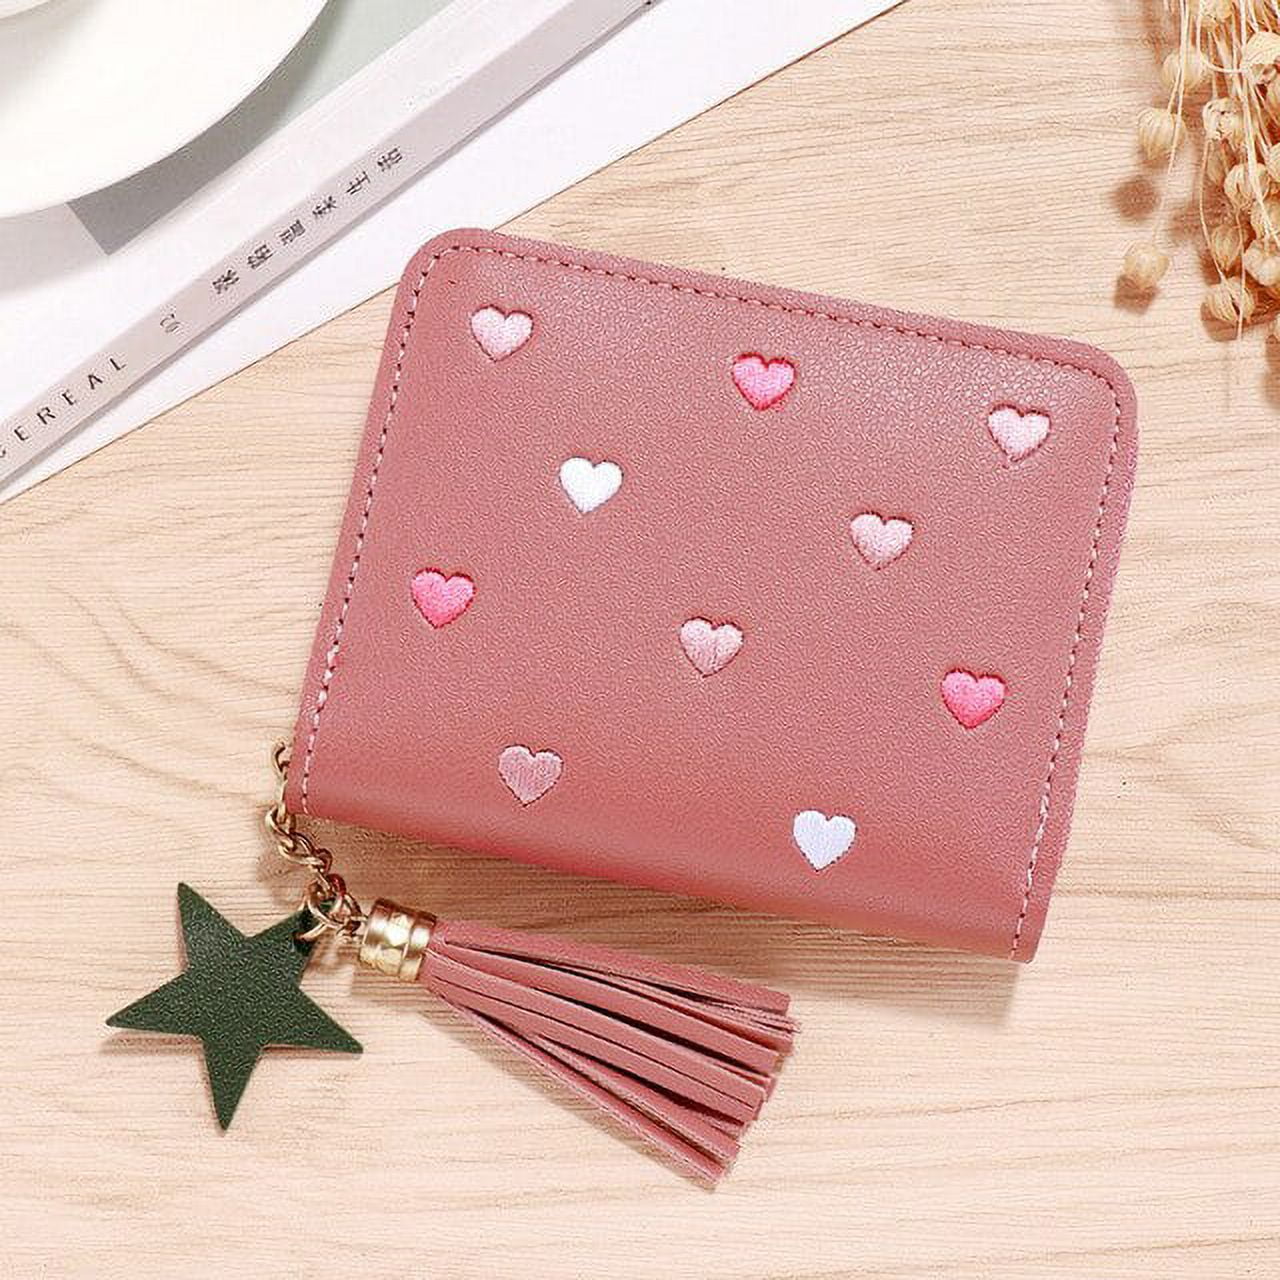 Kawaii Leather Mini Crossbody For Little Girls Perfect For Parties And  Everyday Use From Childbag_wholesale, $6.86 | DHgate.Com